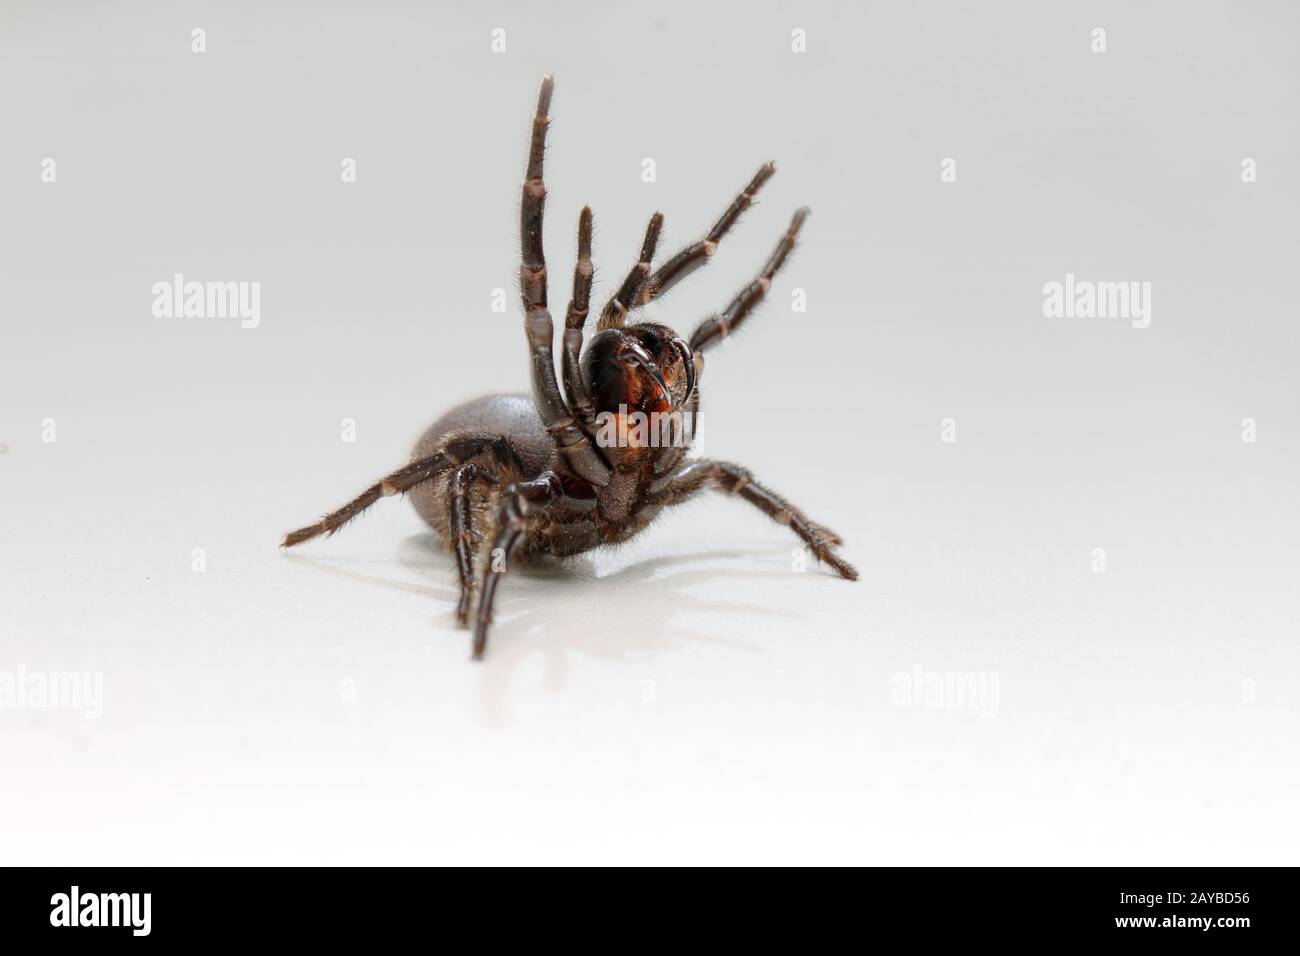 A Sydney Funnel Web Spider rears with fangs extended. Stock Photo